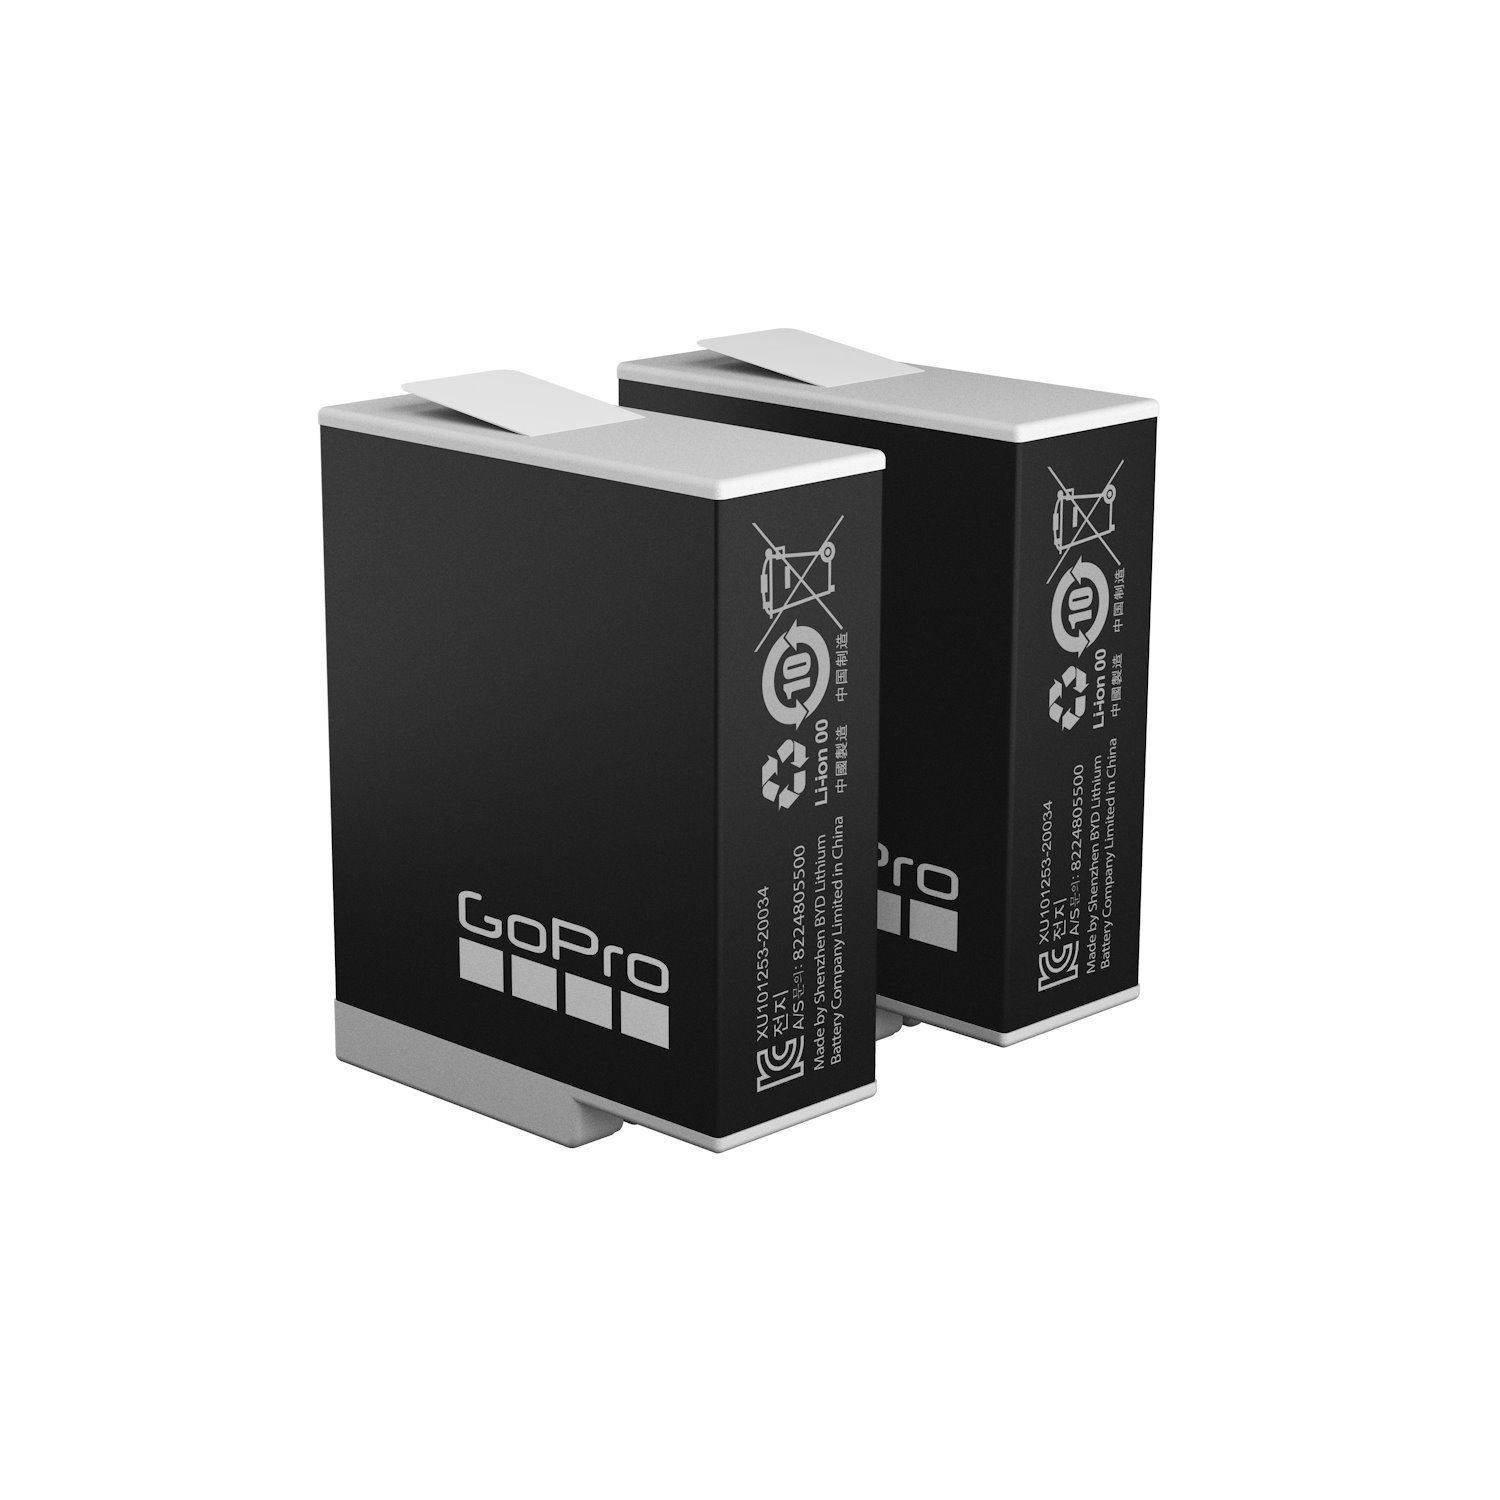 GoPro Enduro Camera Battery (Rechargeable Battery 2-Pack)